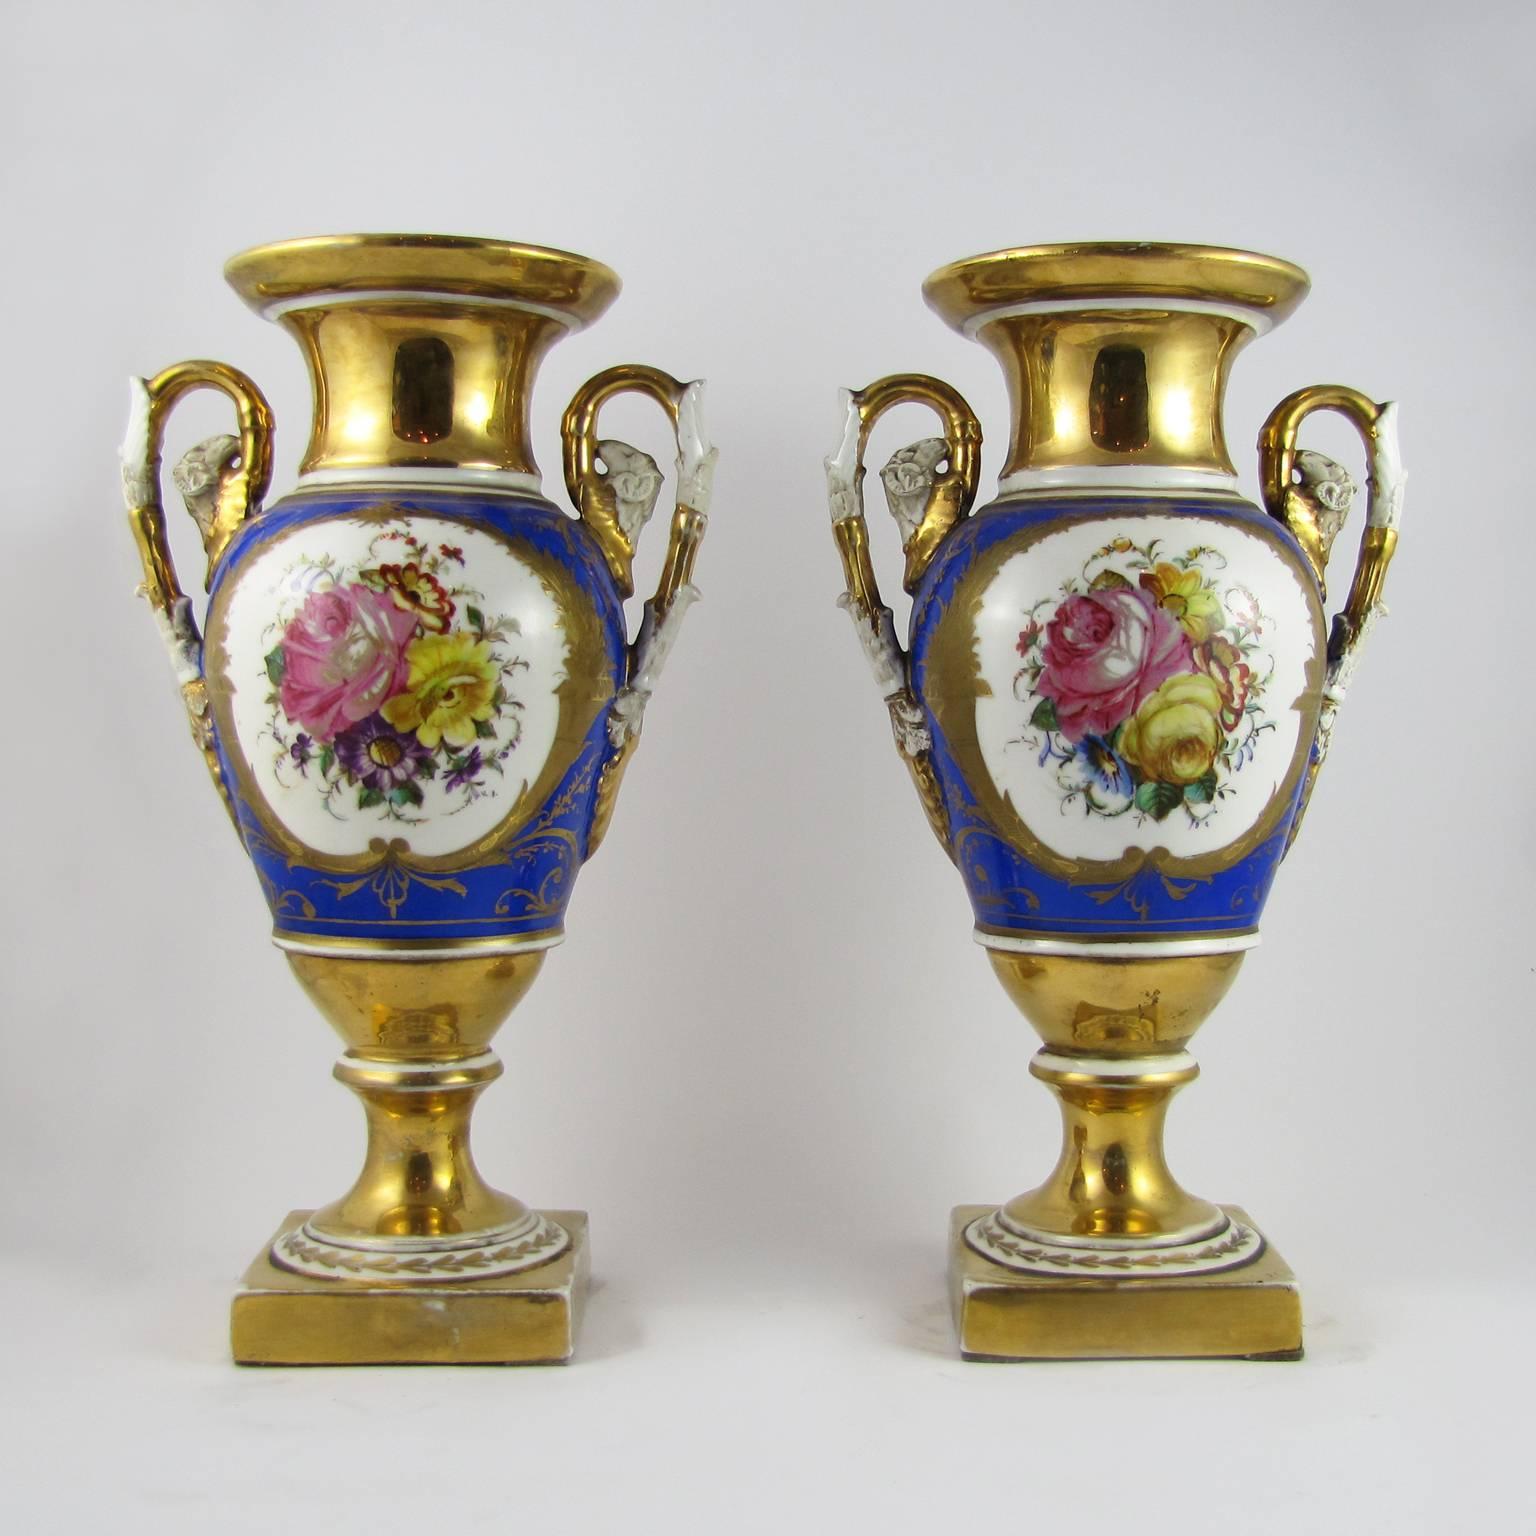 A beautiful pair of Amphora vases in white porcelain, gilded and cobalt blue painted.
The two handles in biscuit porcelain are transformed in ram heads on the upper end.
There is a polychrome decoration depicting floral subjects on both sides of